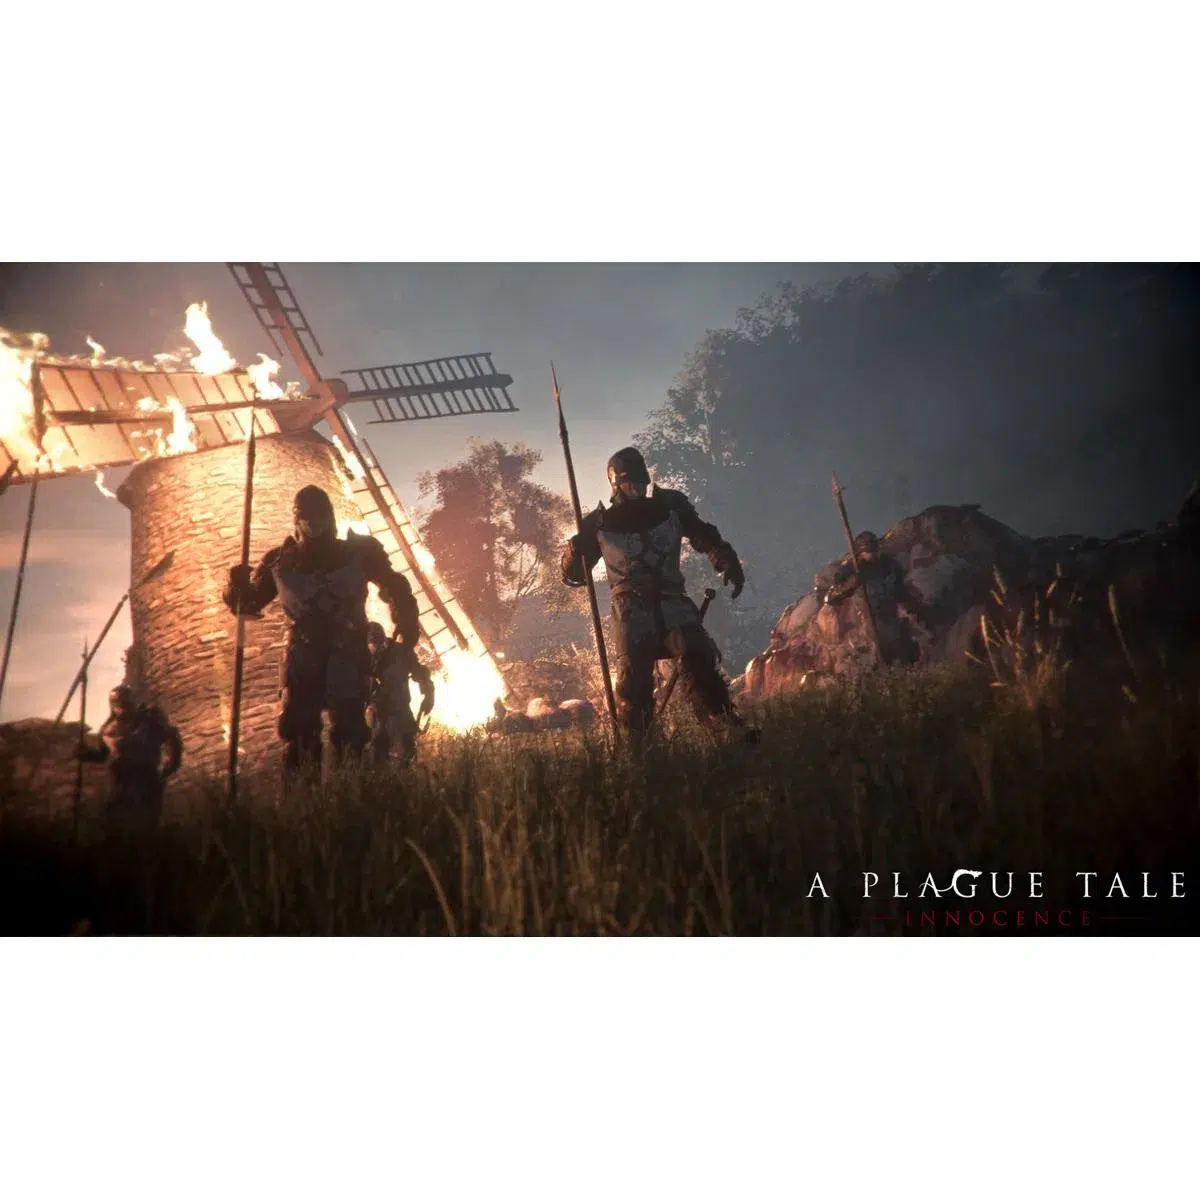 A Plague Tale: Innocence PS4 Game on Sale - Sky Games